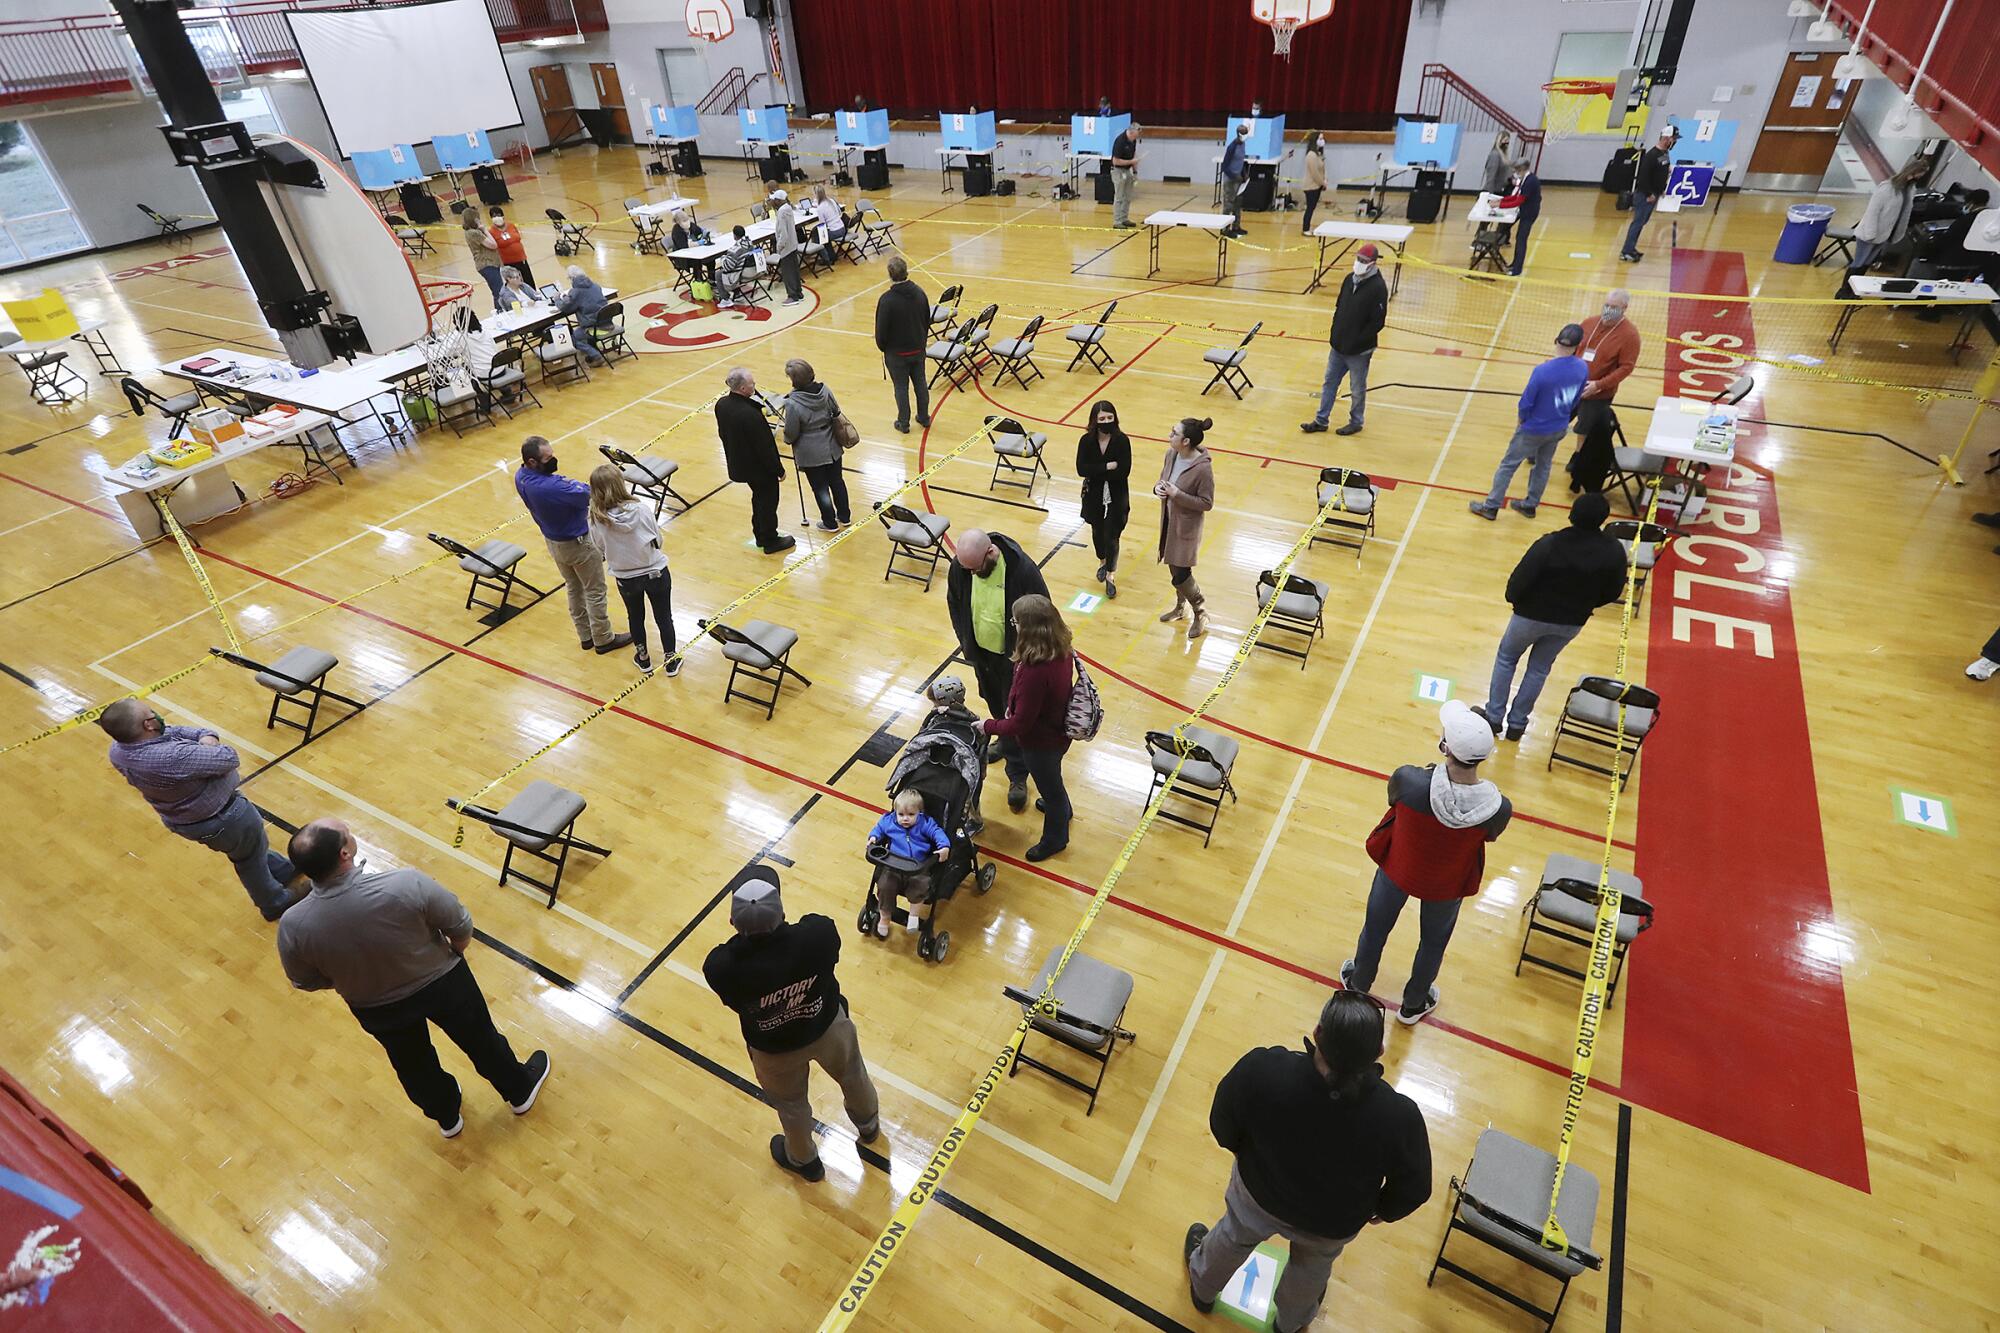 Yellow caution tape held up by folding chairs delineates waiting lines for voters on a school gymnasium floor.